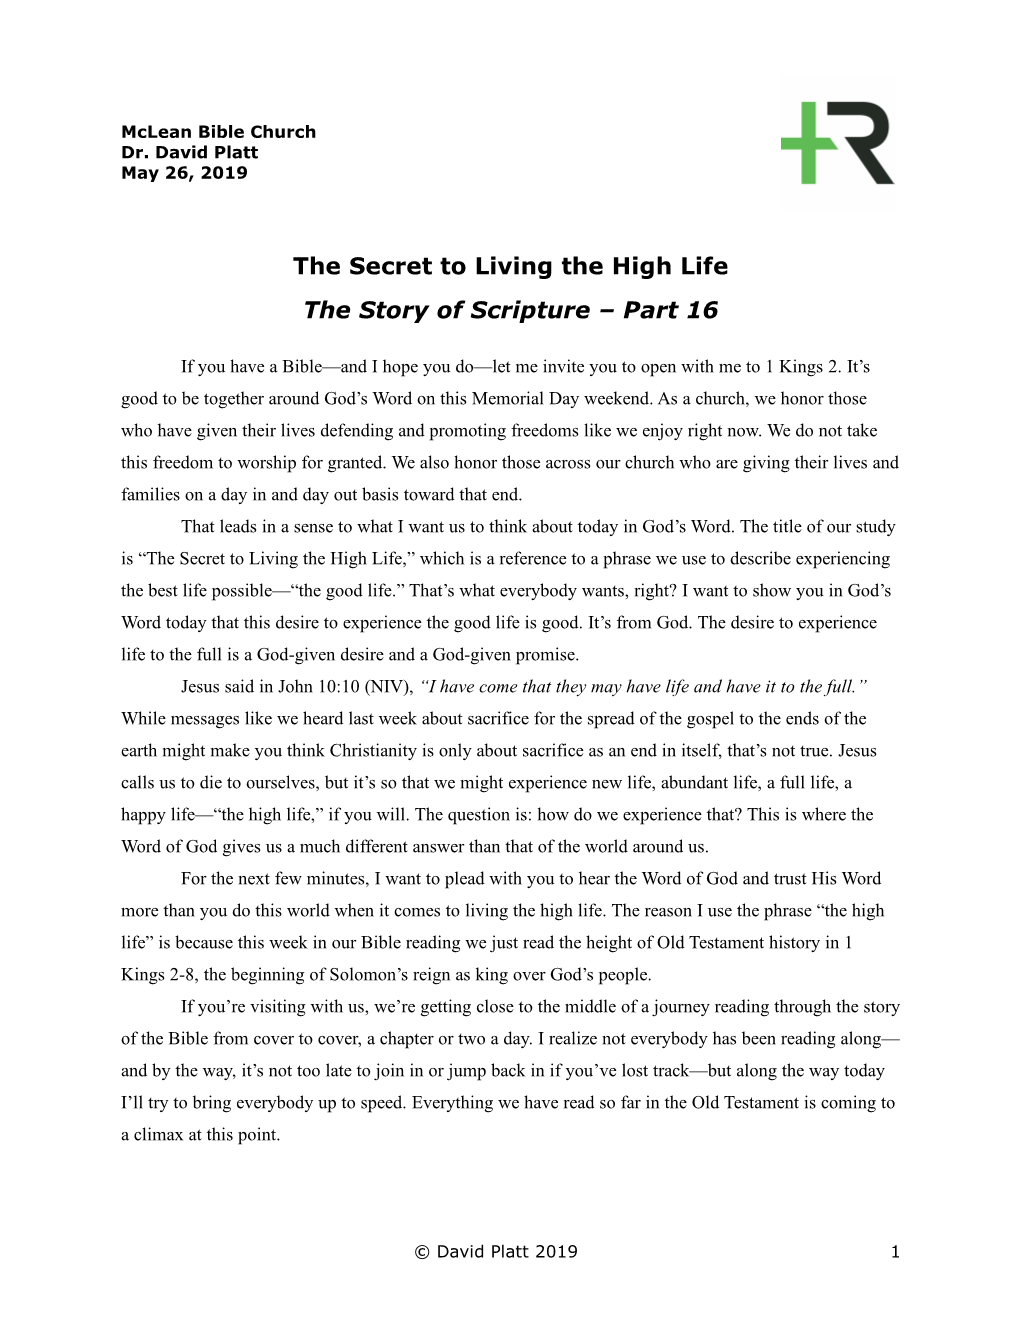 The Secret to Living the High Life the Story of Scripture